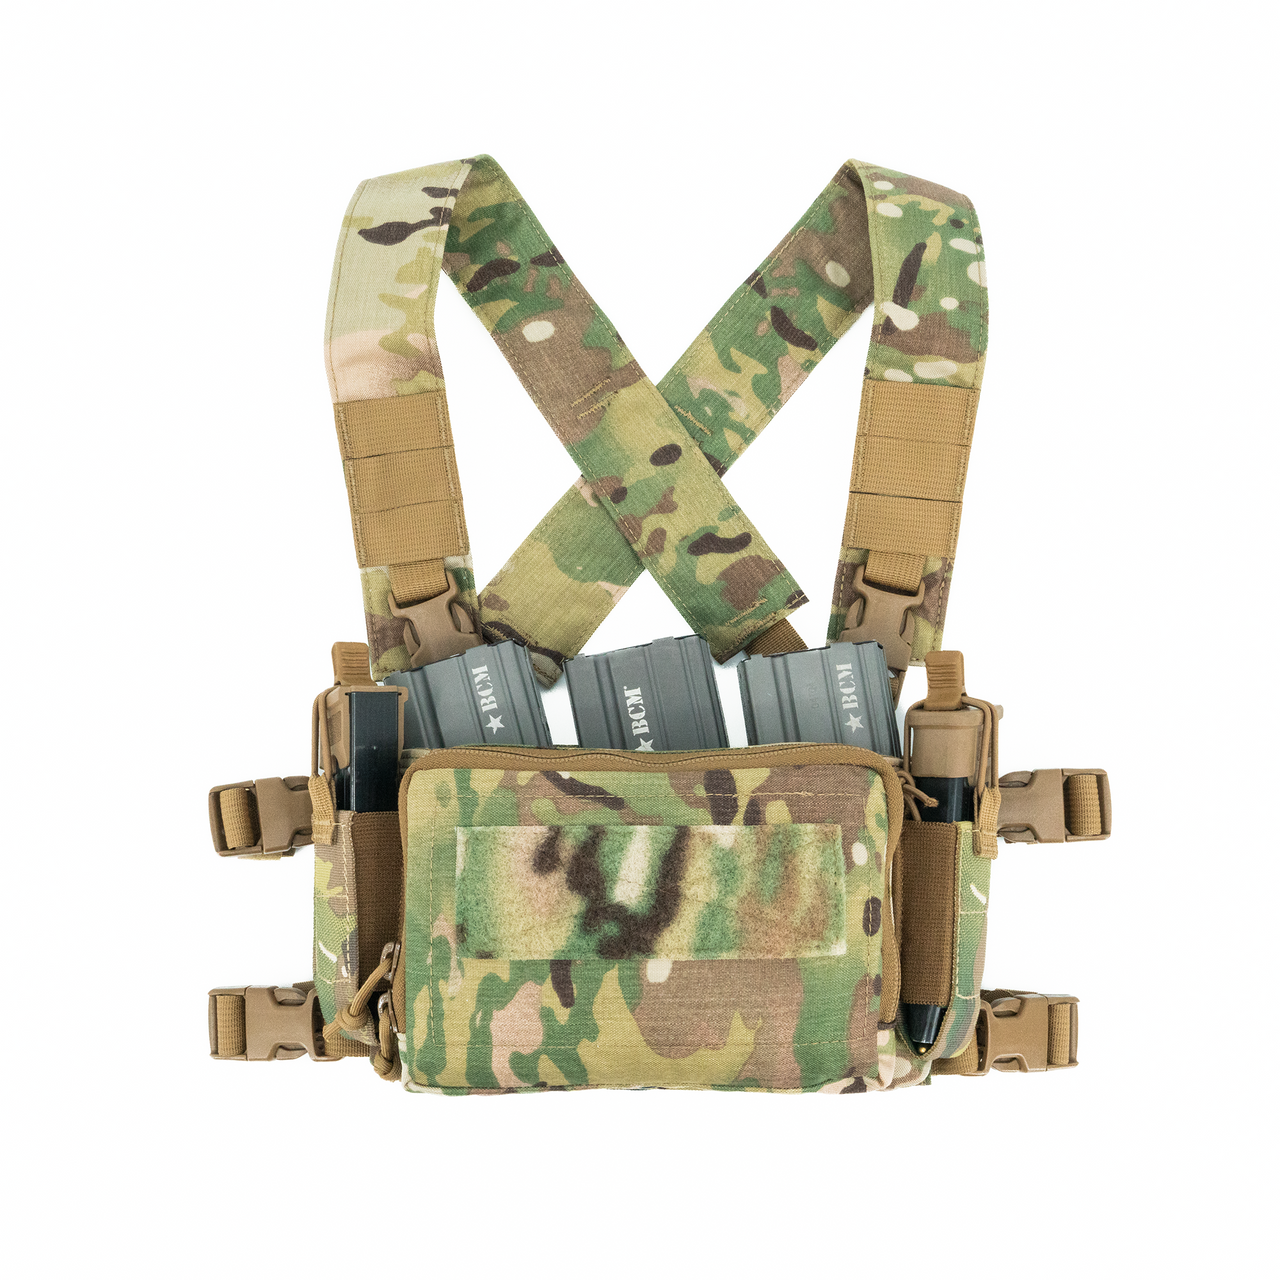 https://cdn11.bigcommerce.com/s-v4xn0g5bwv/images/stencil/1280x1280/products/3633/25089/HALEY_STRACTEGIC_MICRO_CHEST_RIG_MULTICAM__56303.1701153085.png?c=2